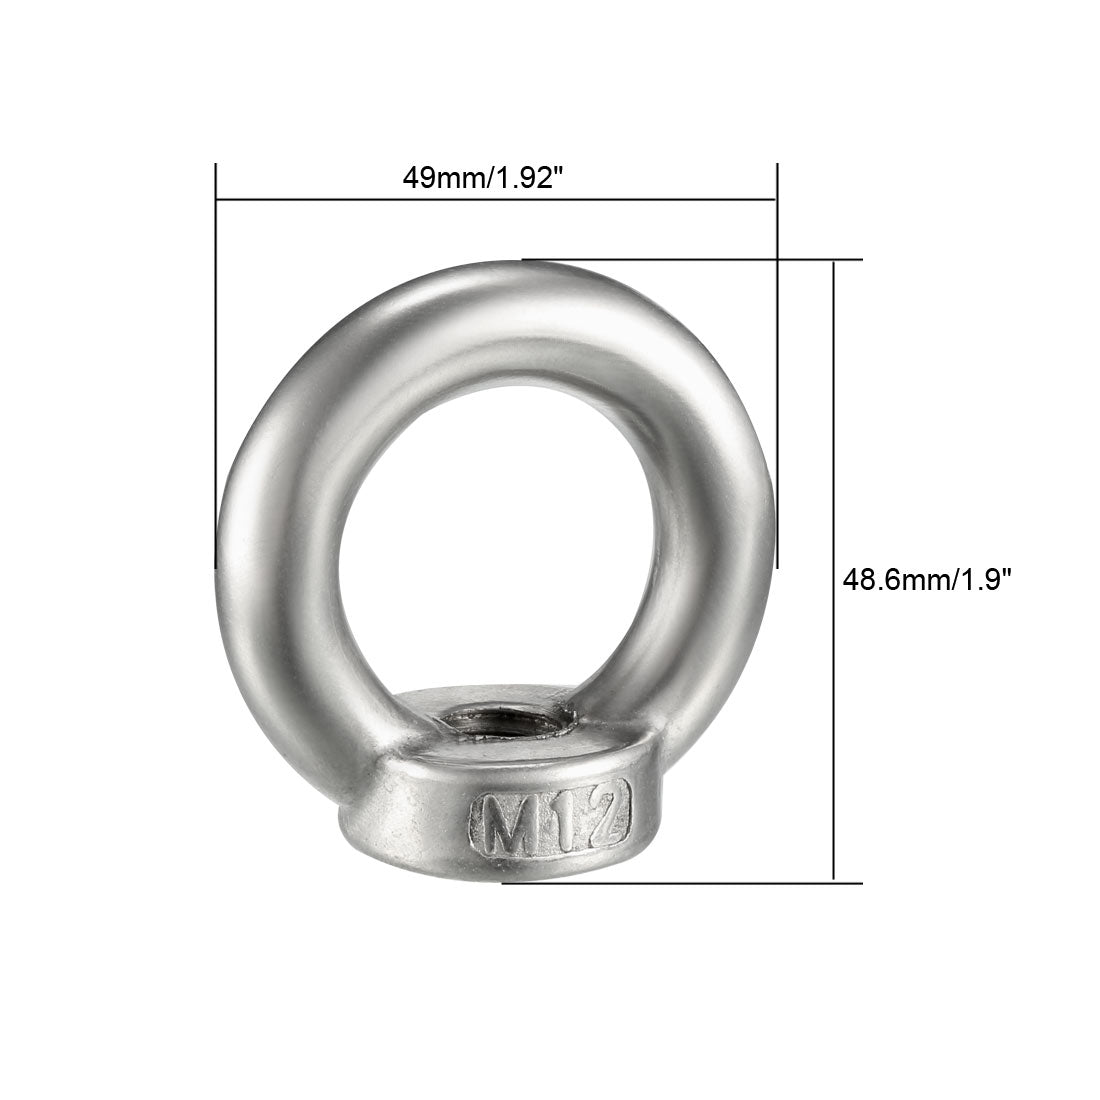 uxcell Uxcell M12 Female Thread 304 Stainless Steel Lifting Eye Nuts Ring 2pcs